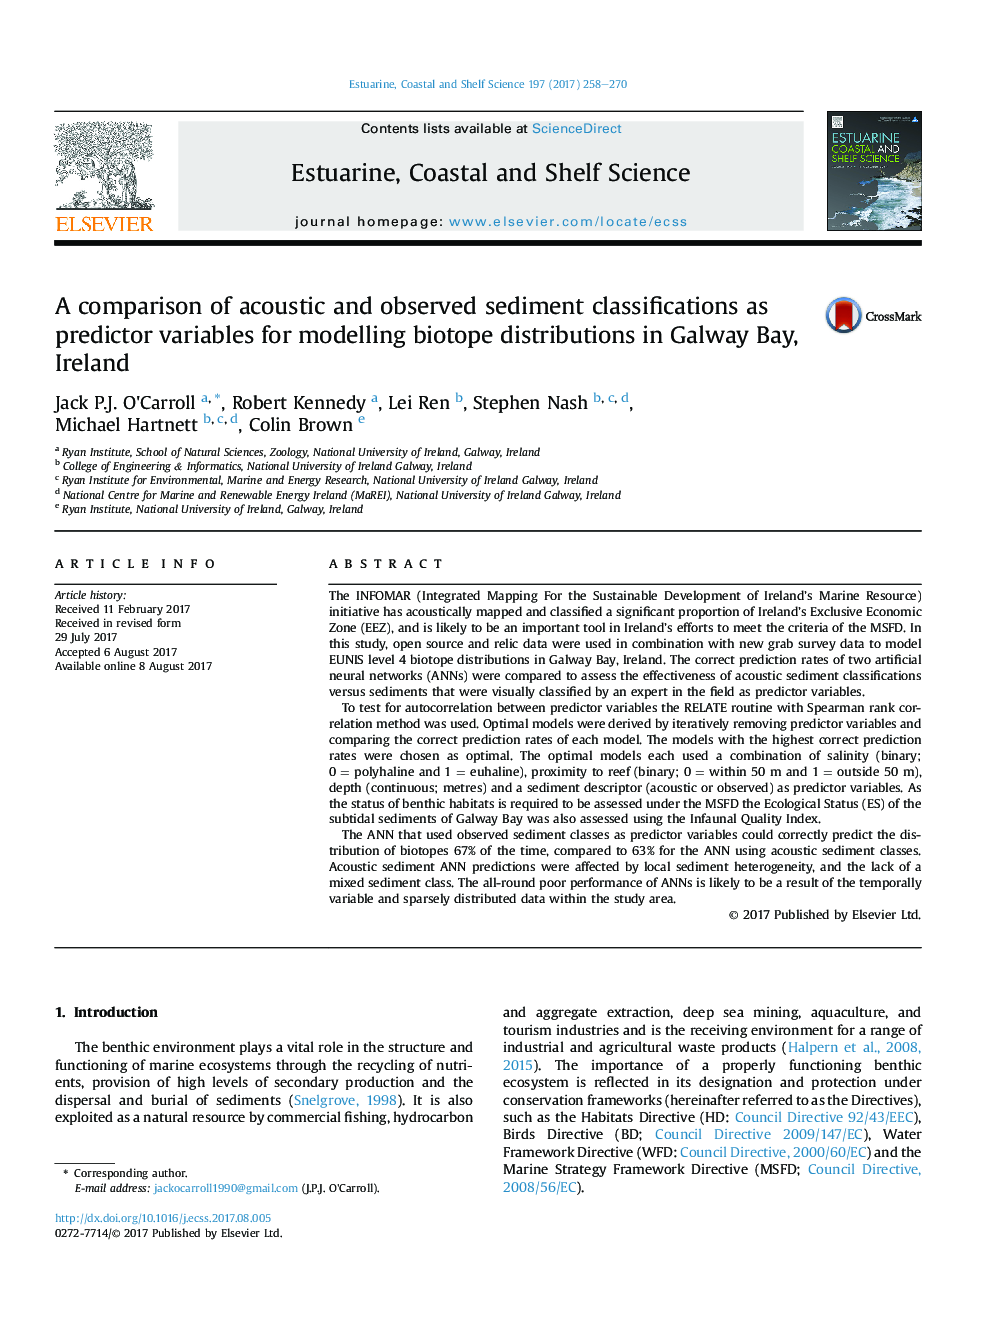 A comparison of acoustic and observed sediment classifications as predictor variables for modelling biotope distributions in Galway Bay, Ireland